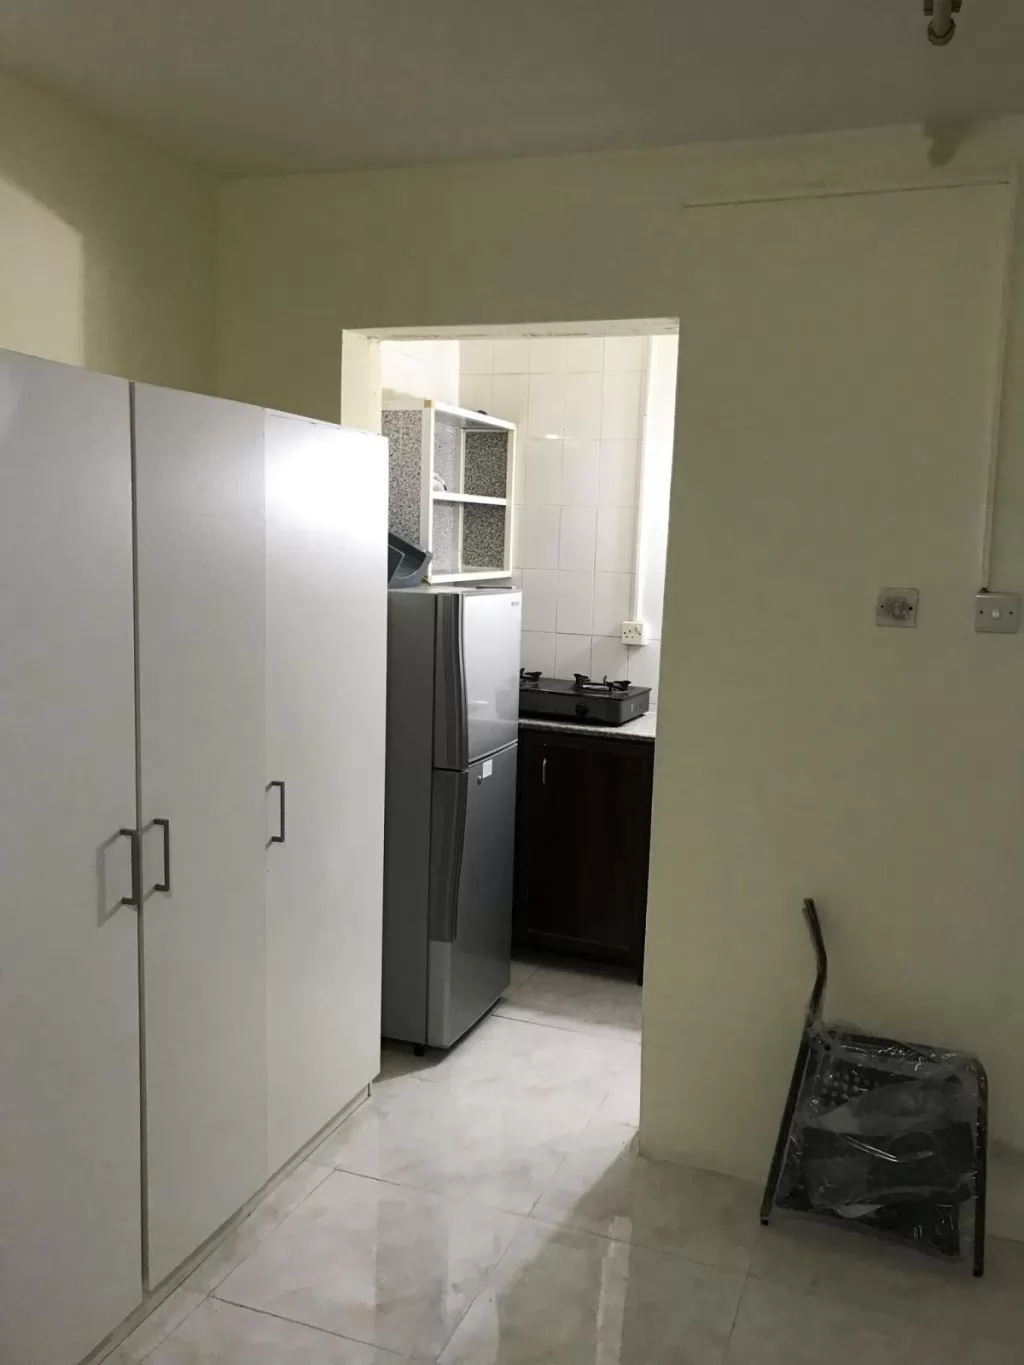 Residential Ready Property 1 Bedroom F/F Apartment  for rent in Old-Airport , Doha-Qatar #16375 - 3  image 